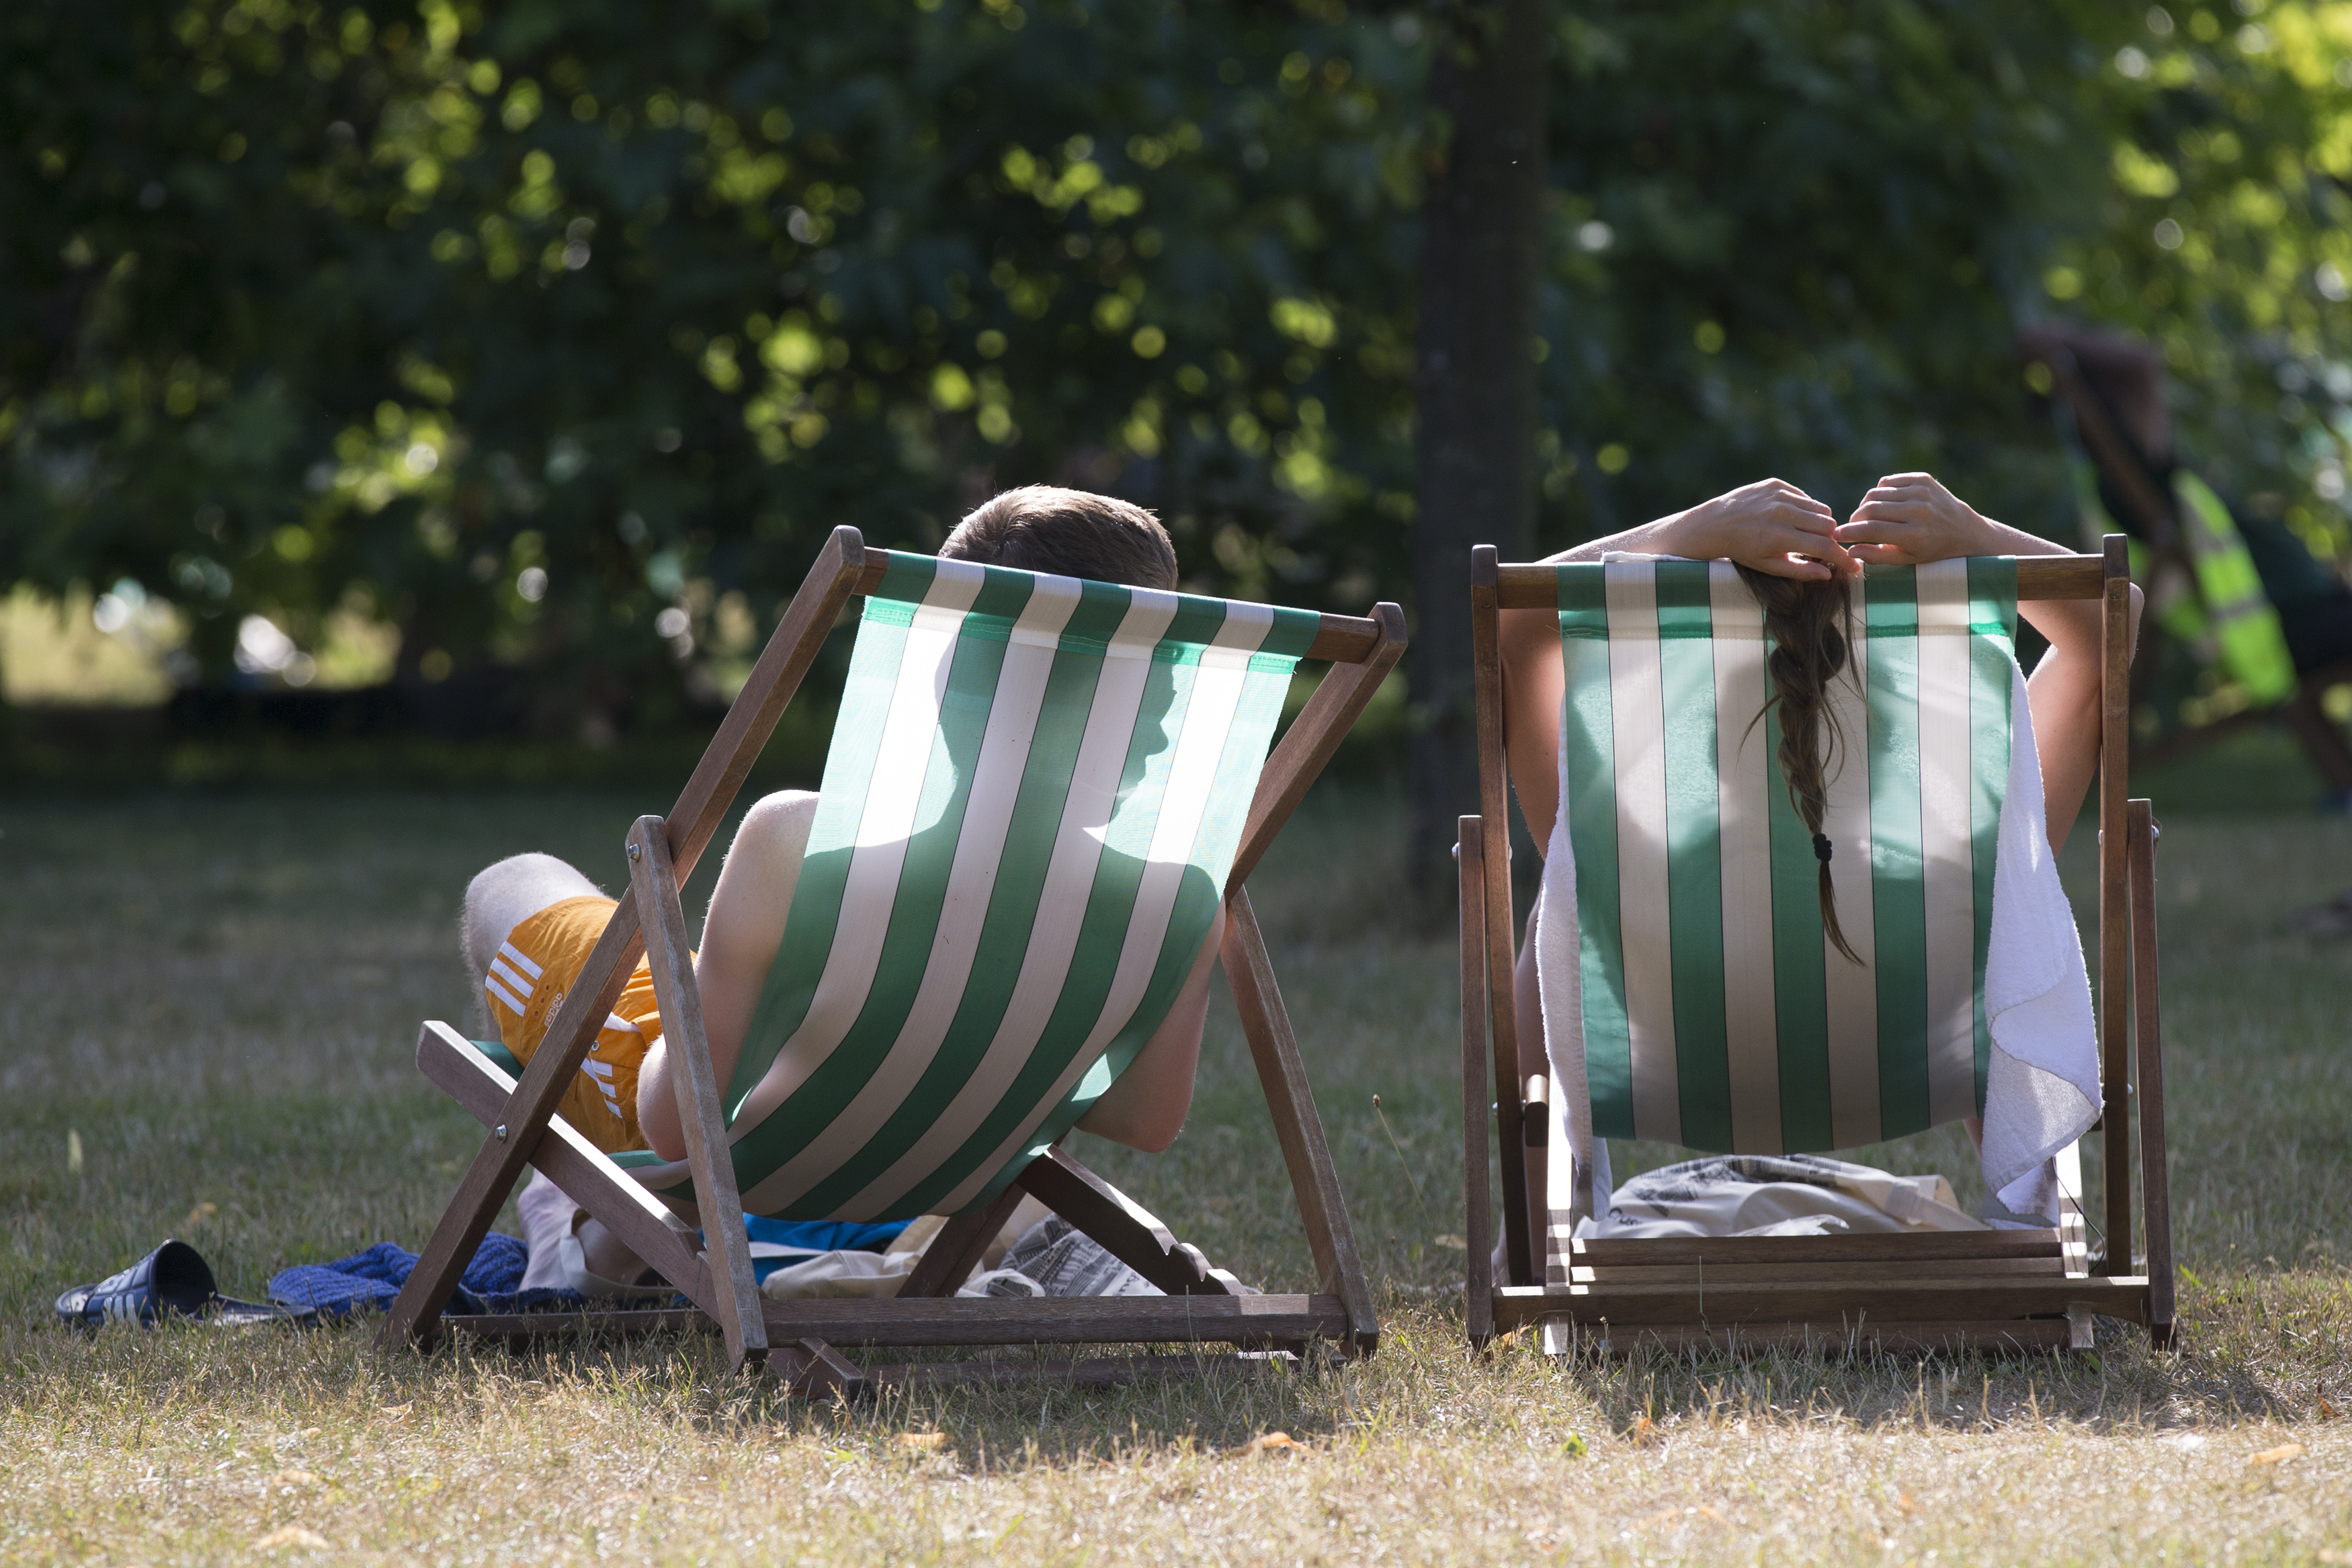 A couple relax on deckchairs in the warm weather in Hyde Park on July 18, 2014 in London as temperatures soar to their highest of the year. (Oli Scarff—Getty Images)